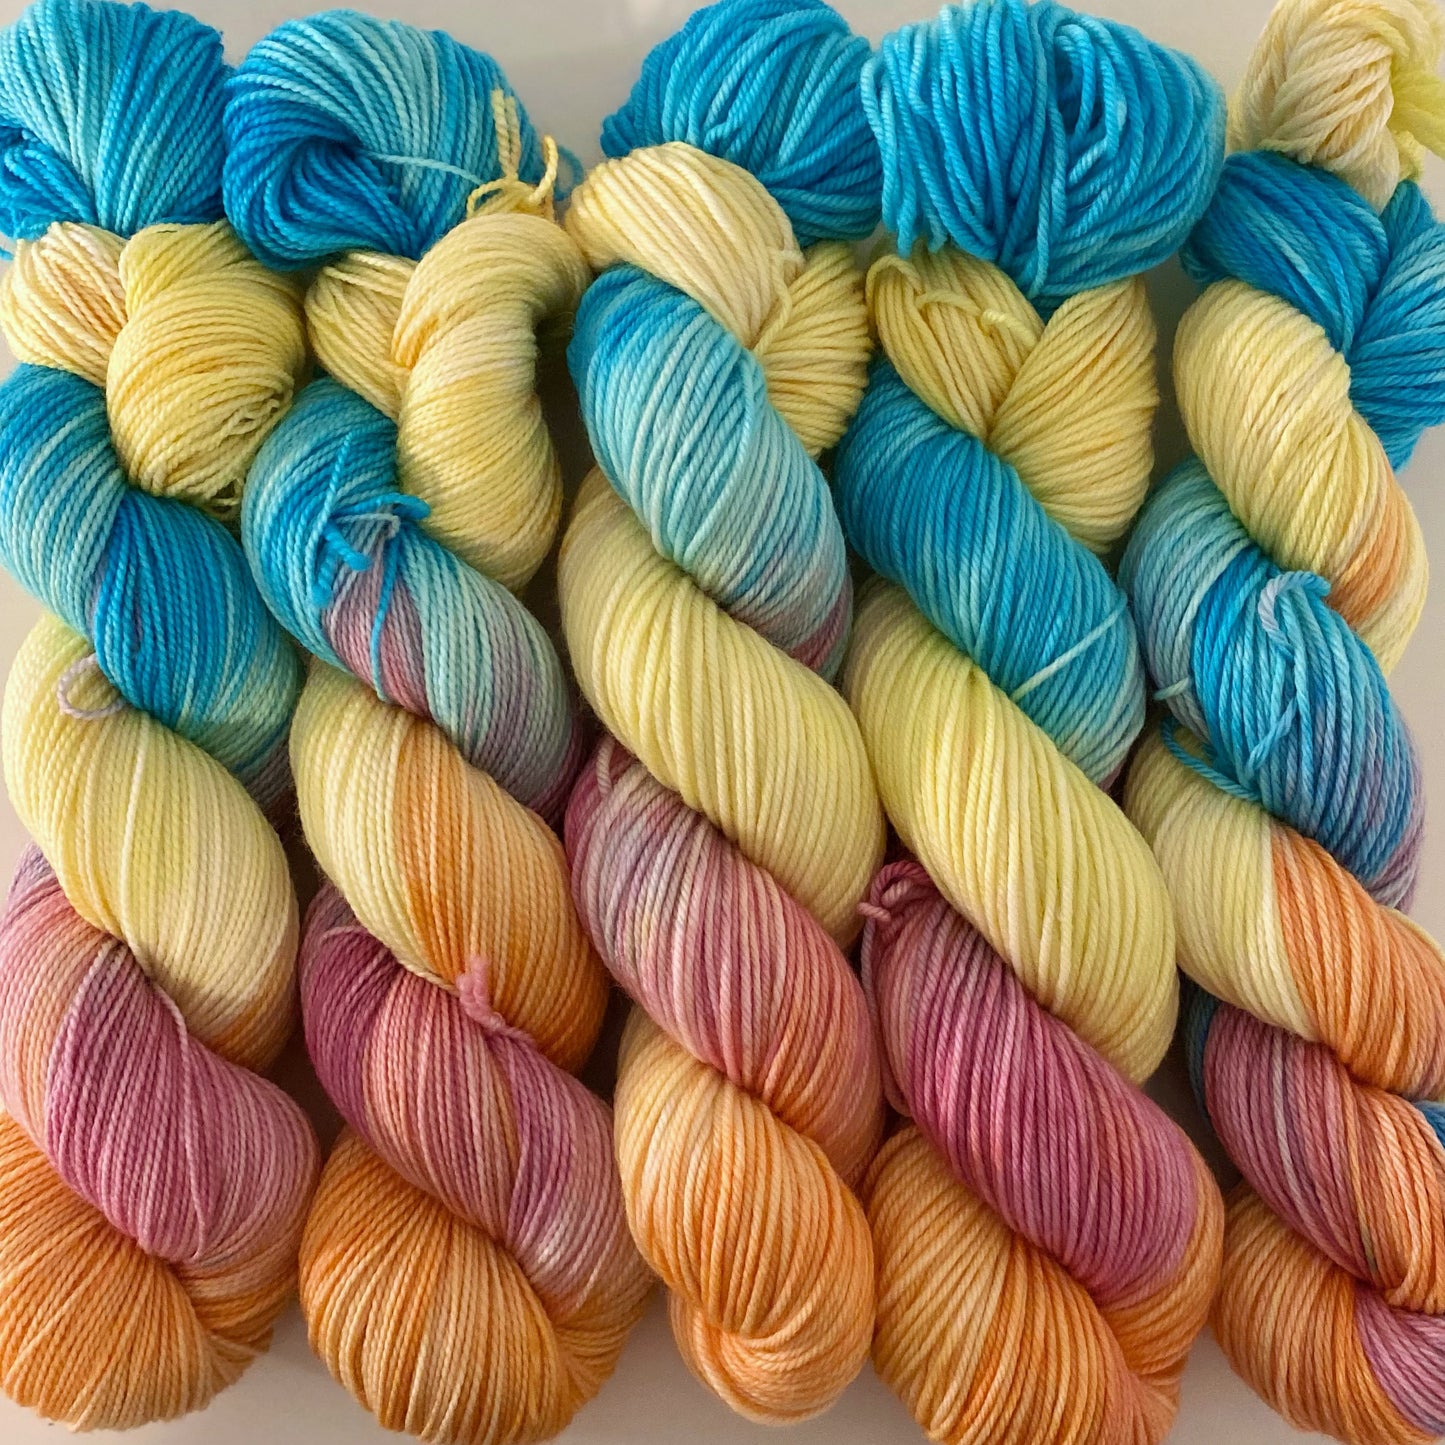 Dyed to Order - Tequila Sunrise